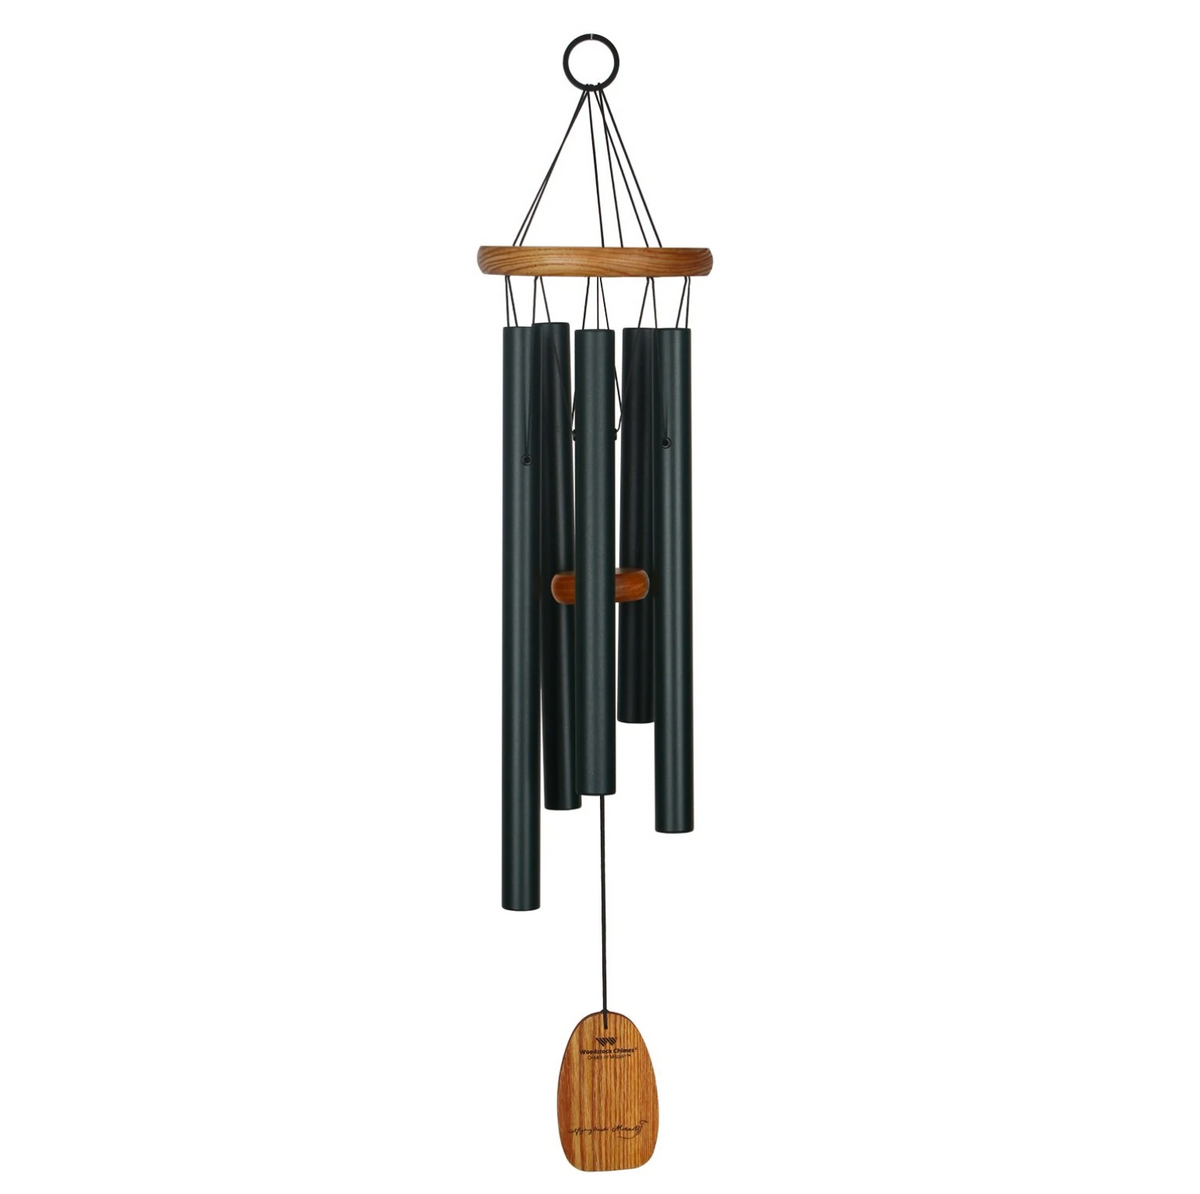 Woodstock Chimes of Mozart - Medium - Heart of the Home PA